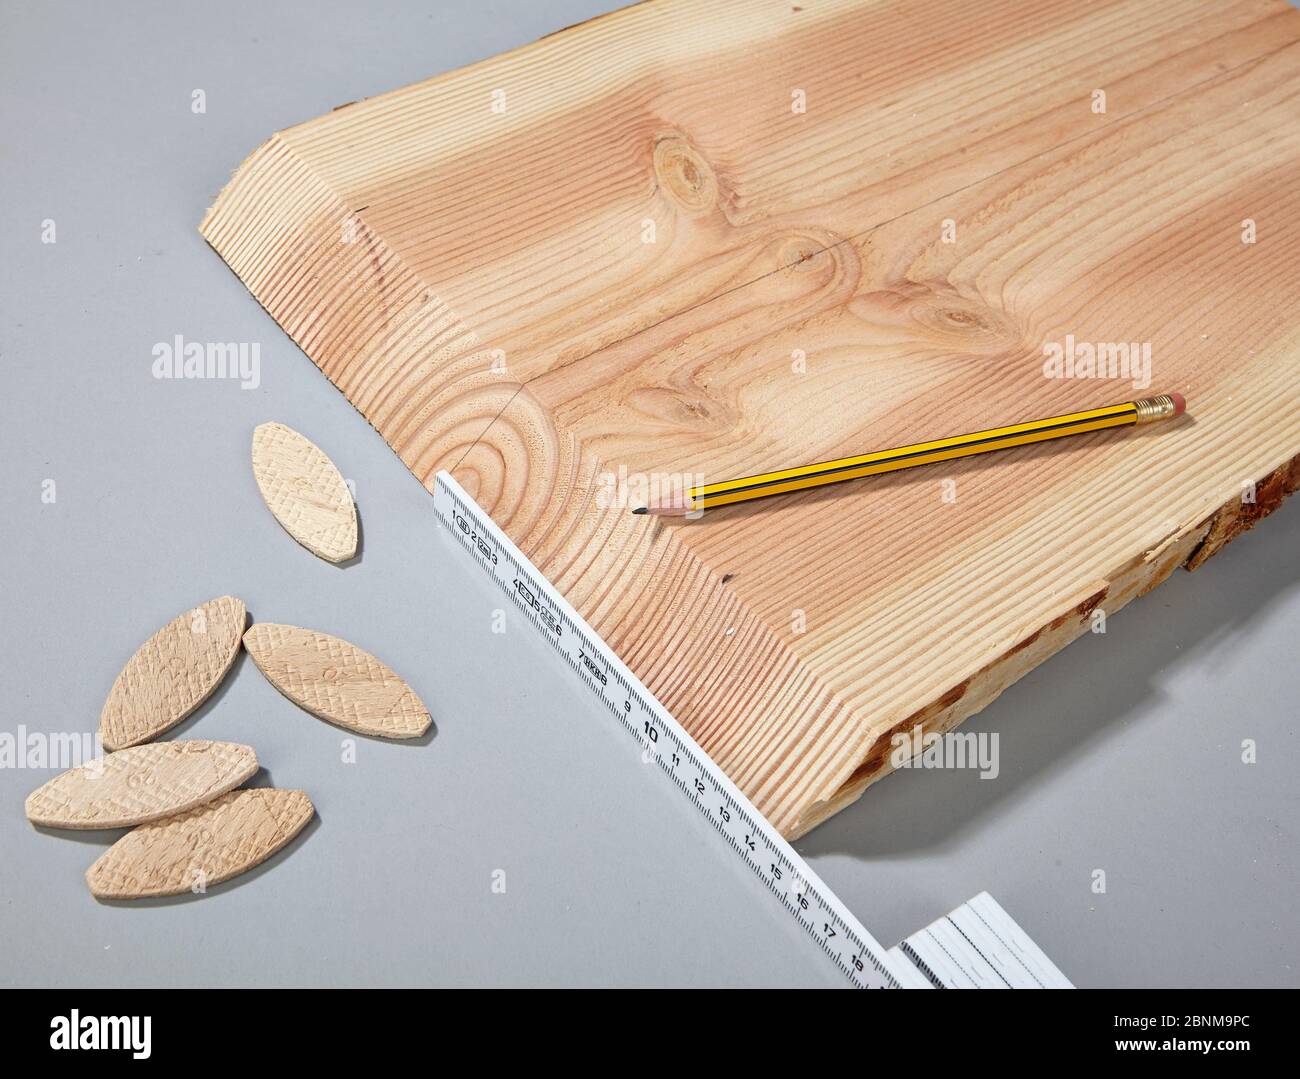 construction of a shelf made of wood, do-it-yourself production, step-by-step, step 4b measuring and marking the places for the dowel milling Stock Photo